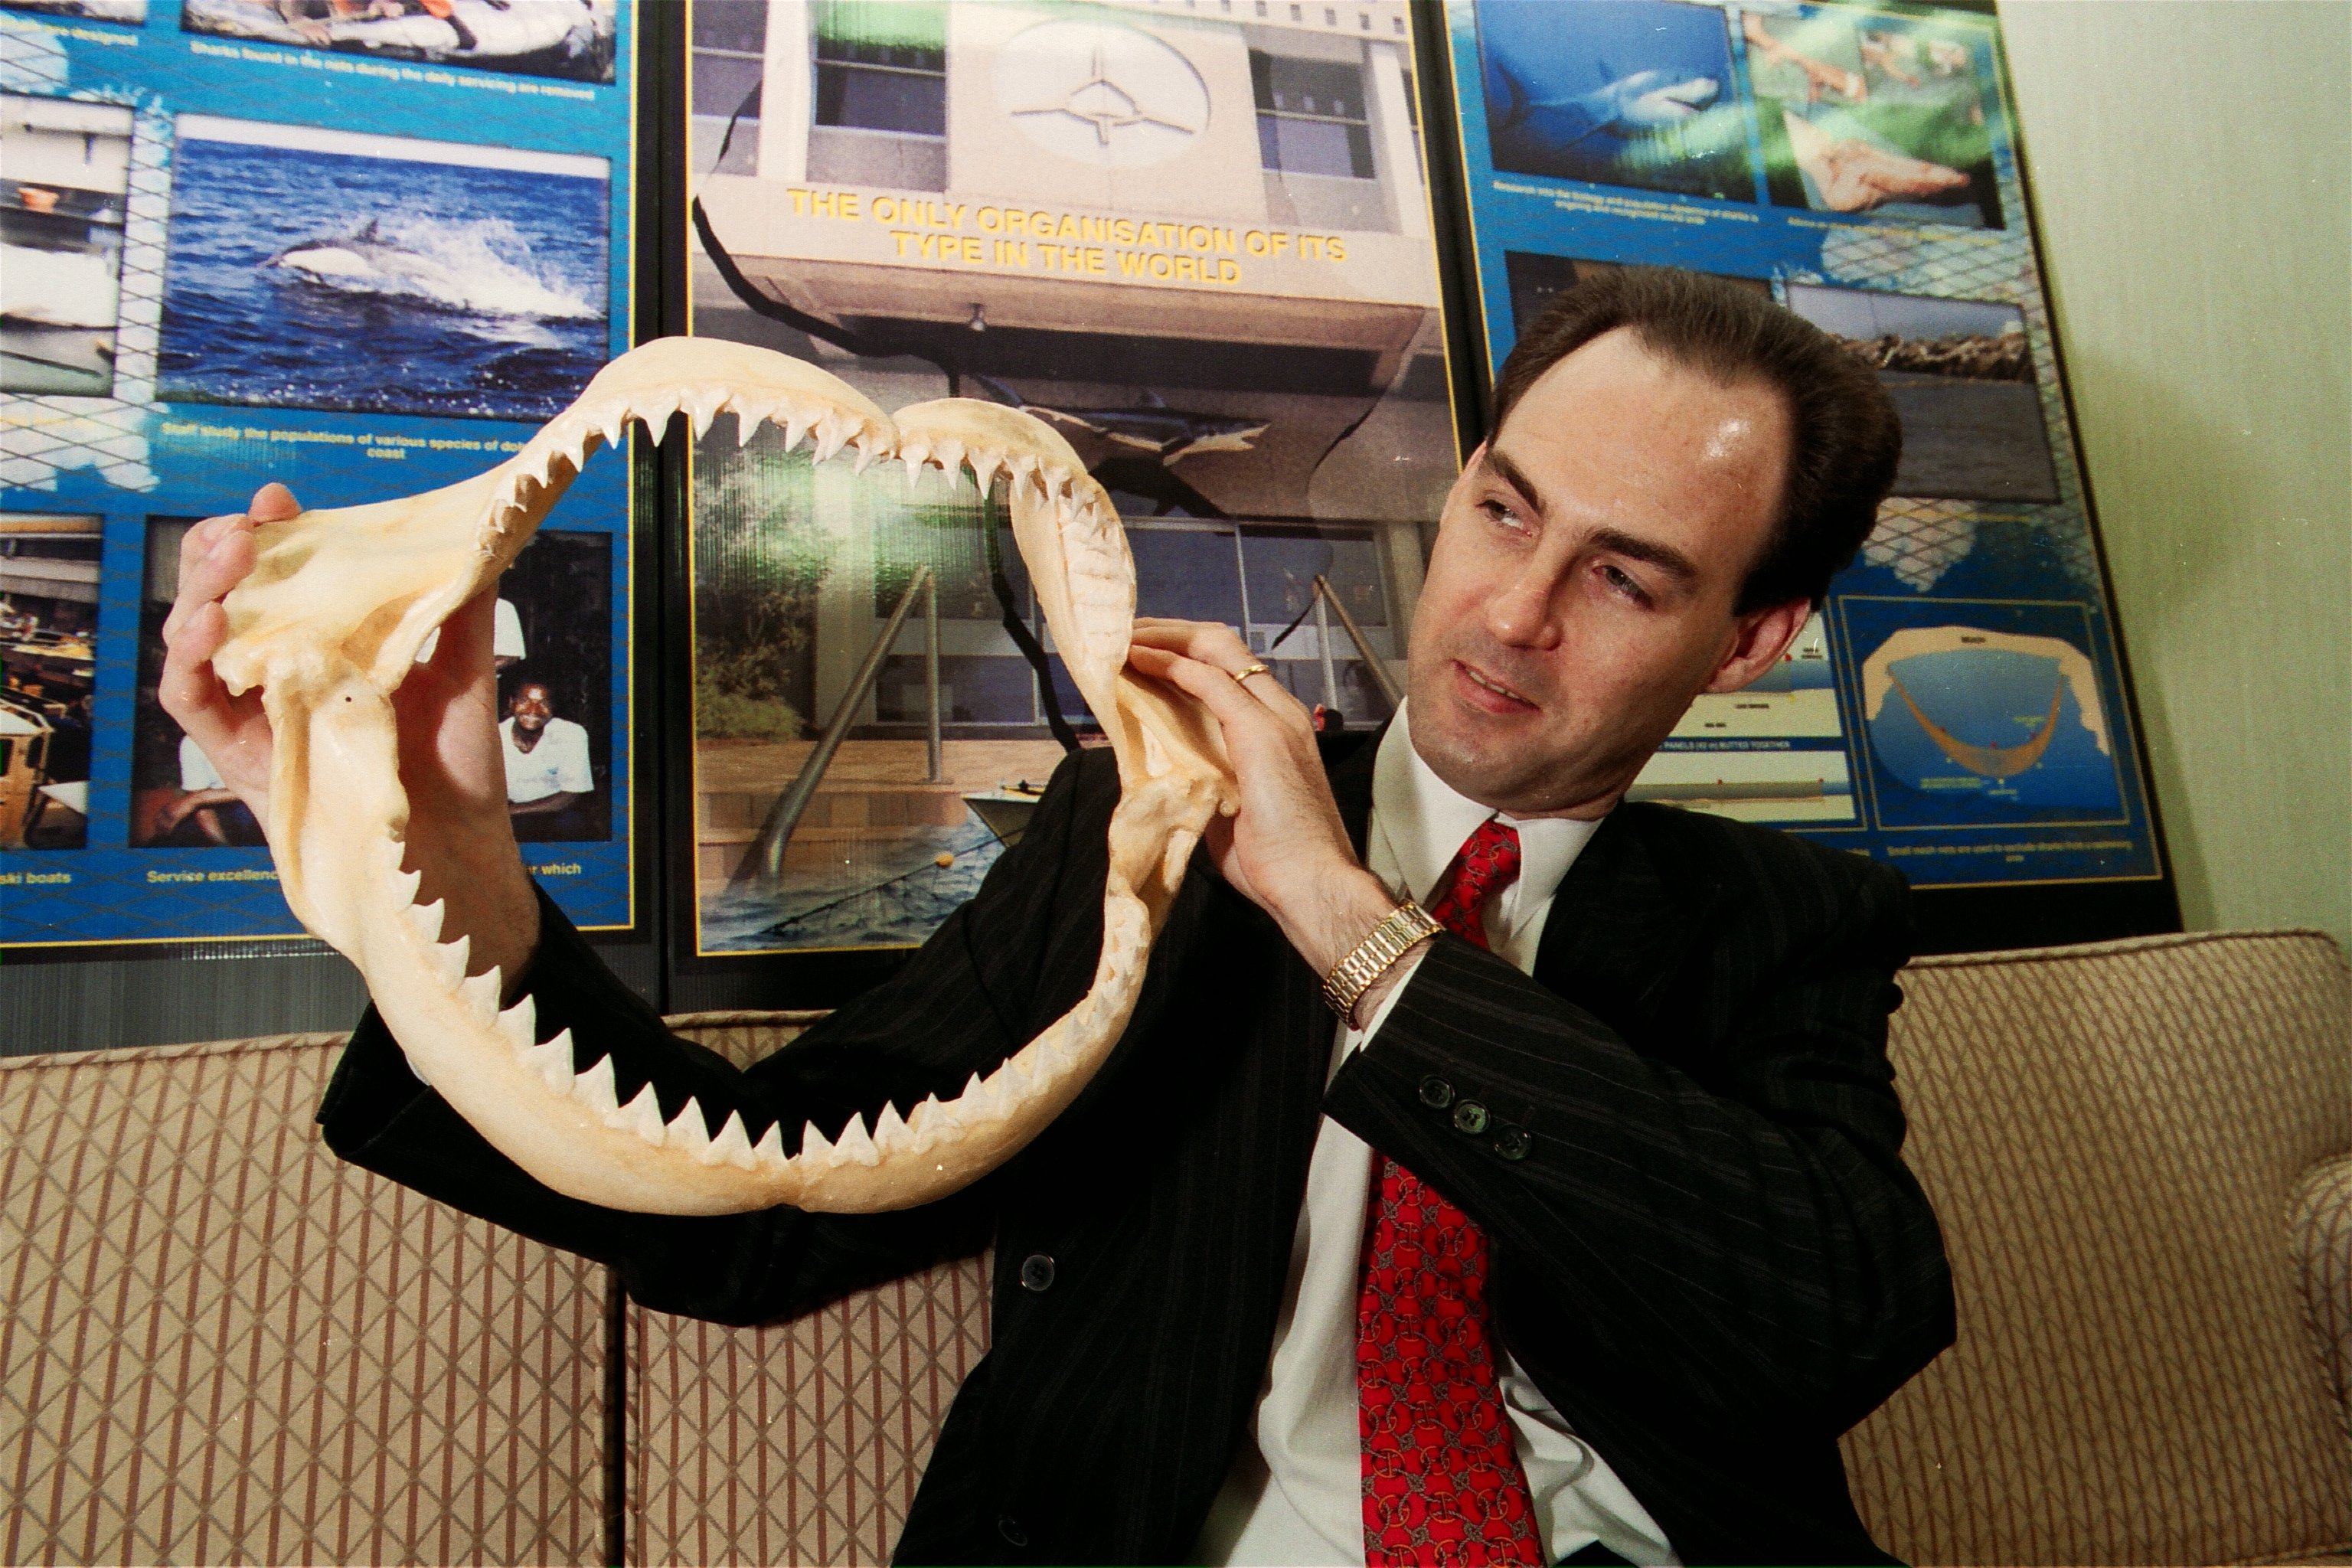 South African consul-general Michael Farr holding shark jaws at the centre of the Natal Sharks Board. The Board’s nets are used in Hong Kong to keep sharks away. Photo: CWH